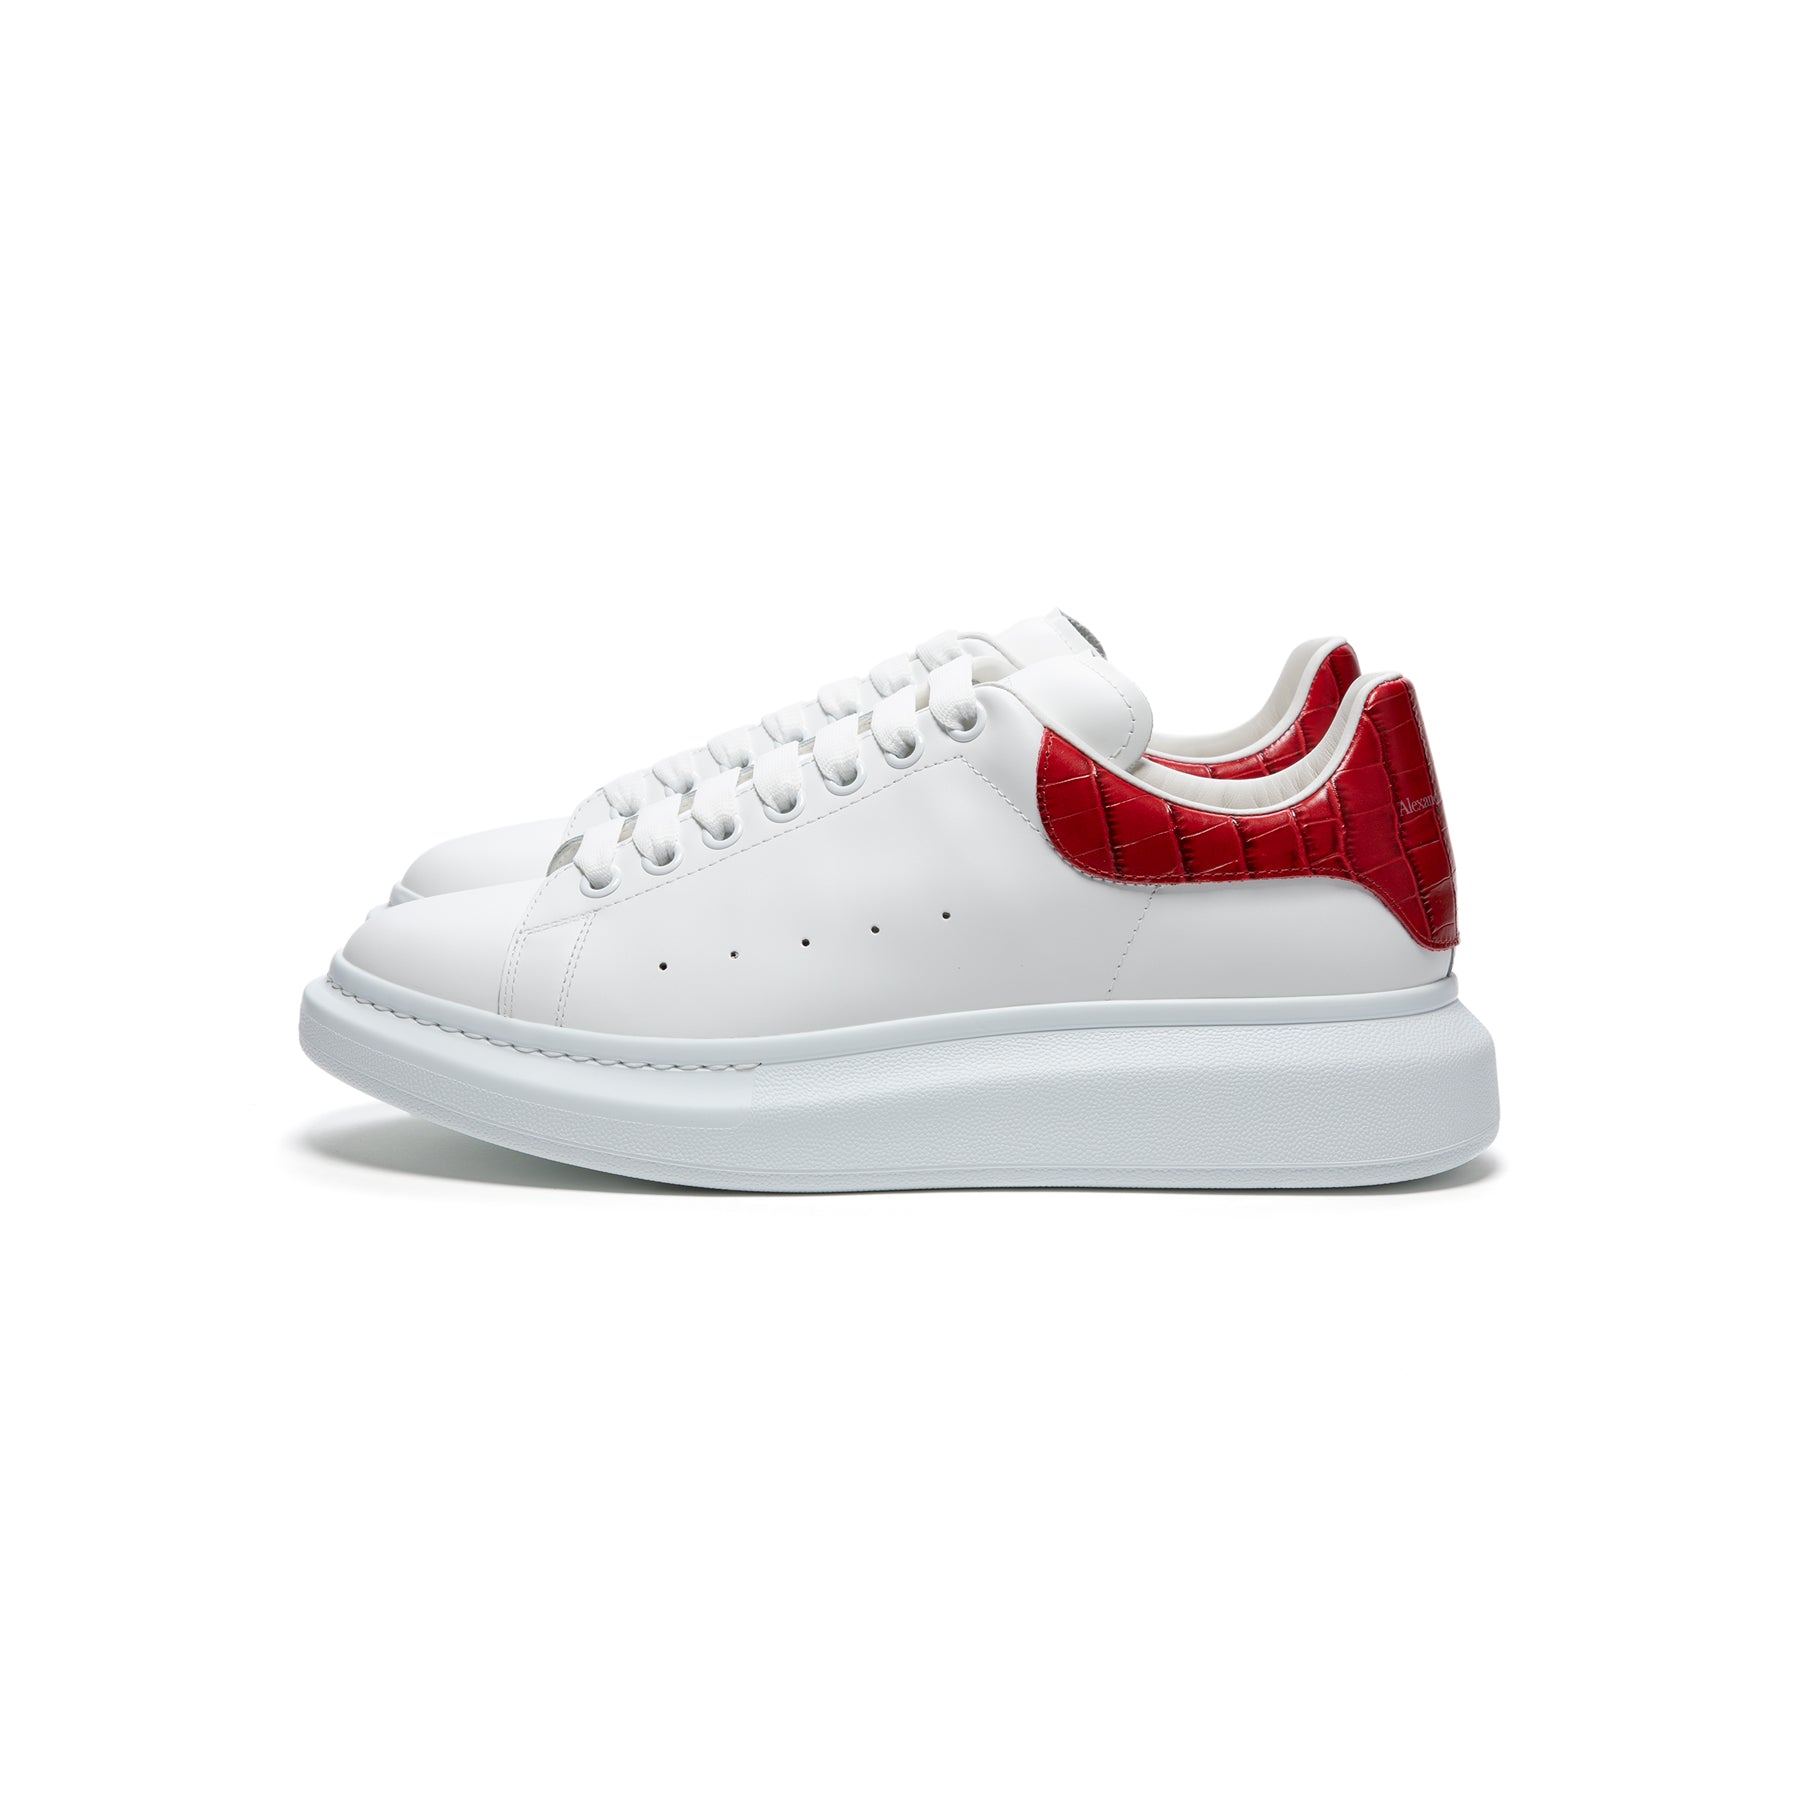 Alexander McQueen Oversized Leather Sneakers (White/Lust Red) EU41